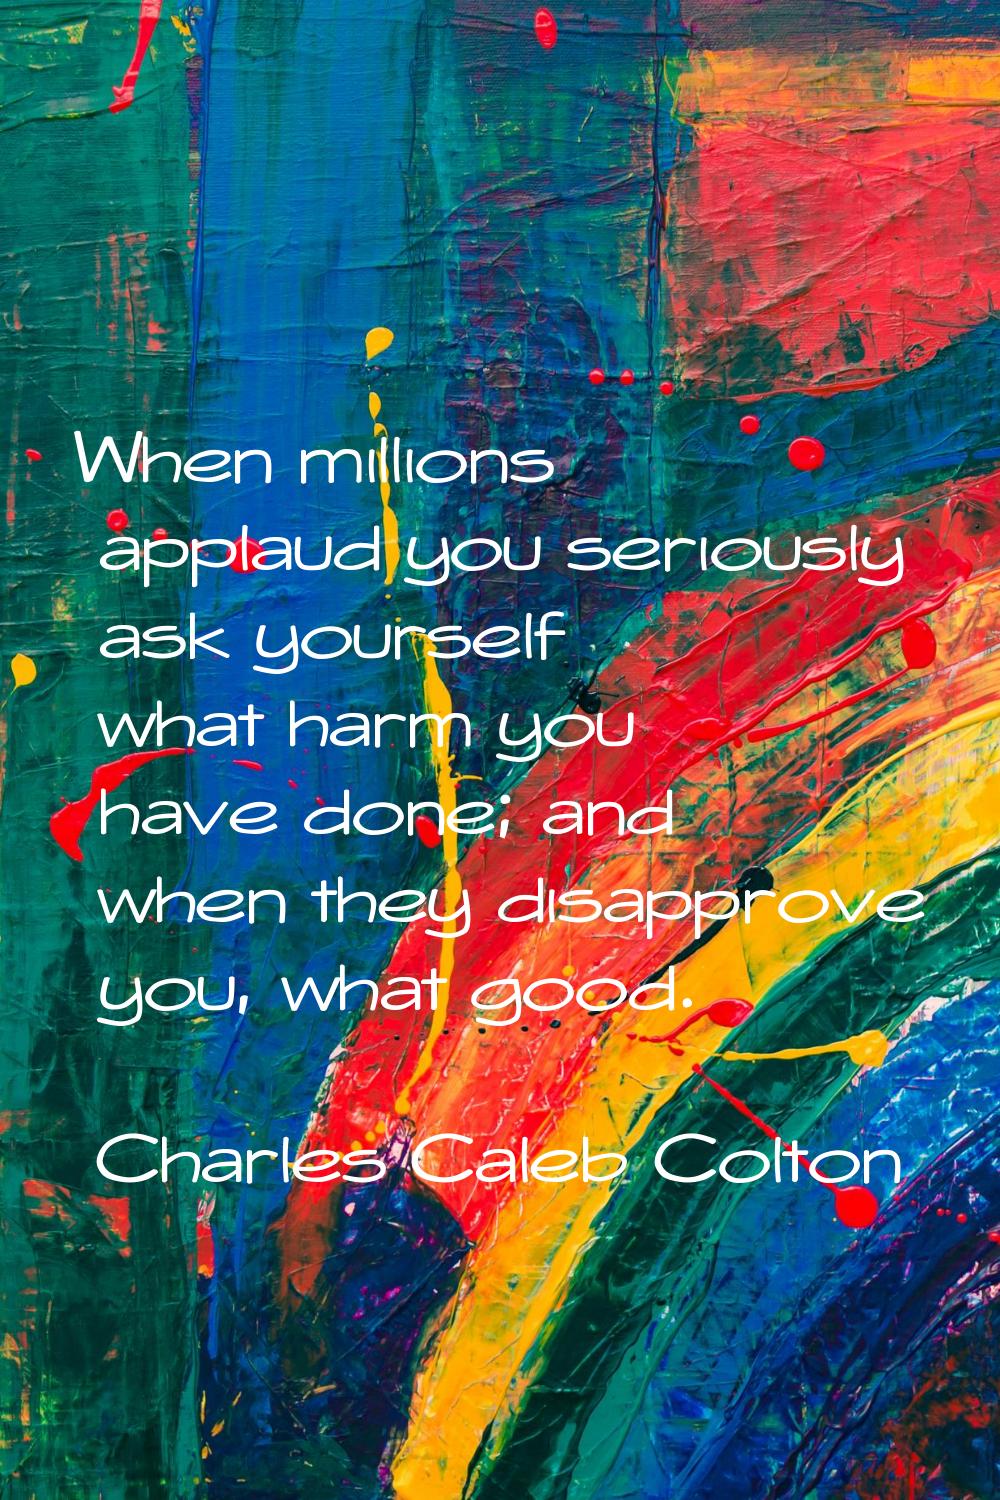 When millions applaud you seriously ask yourself what harm you have done; and when they disapprove 